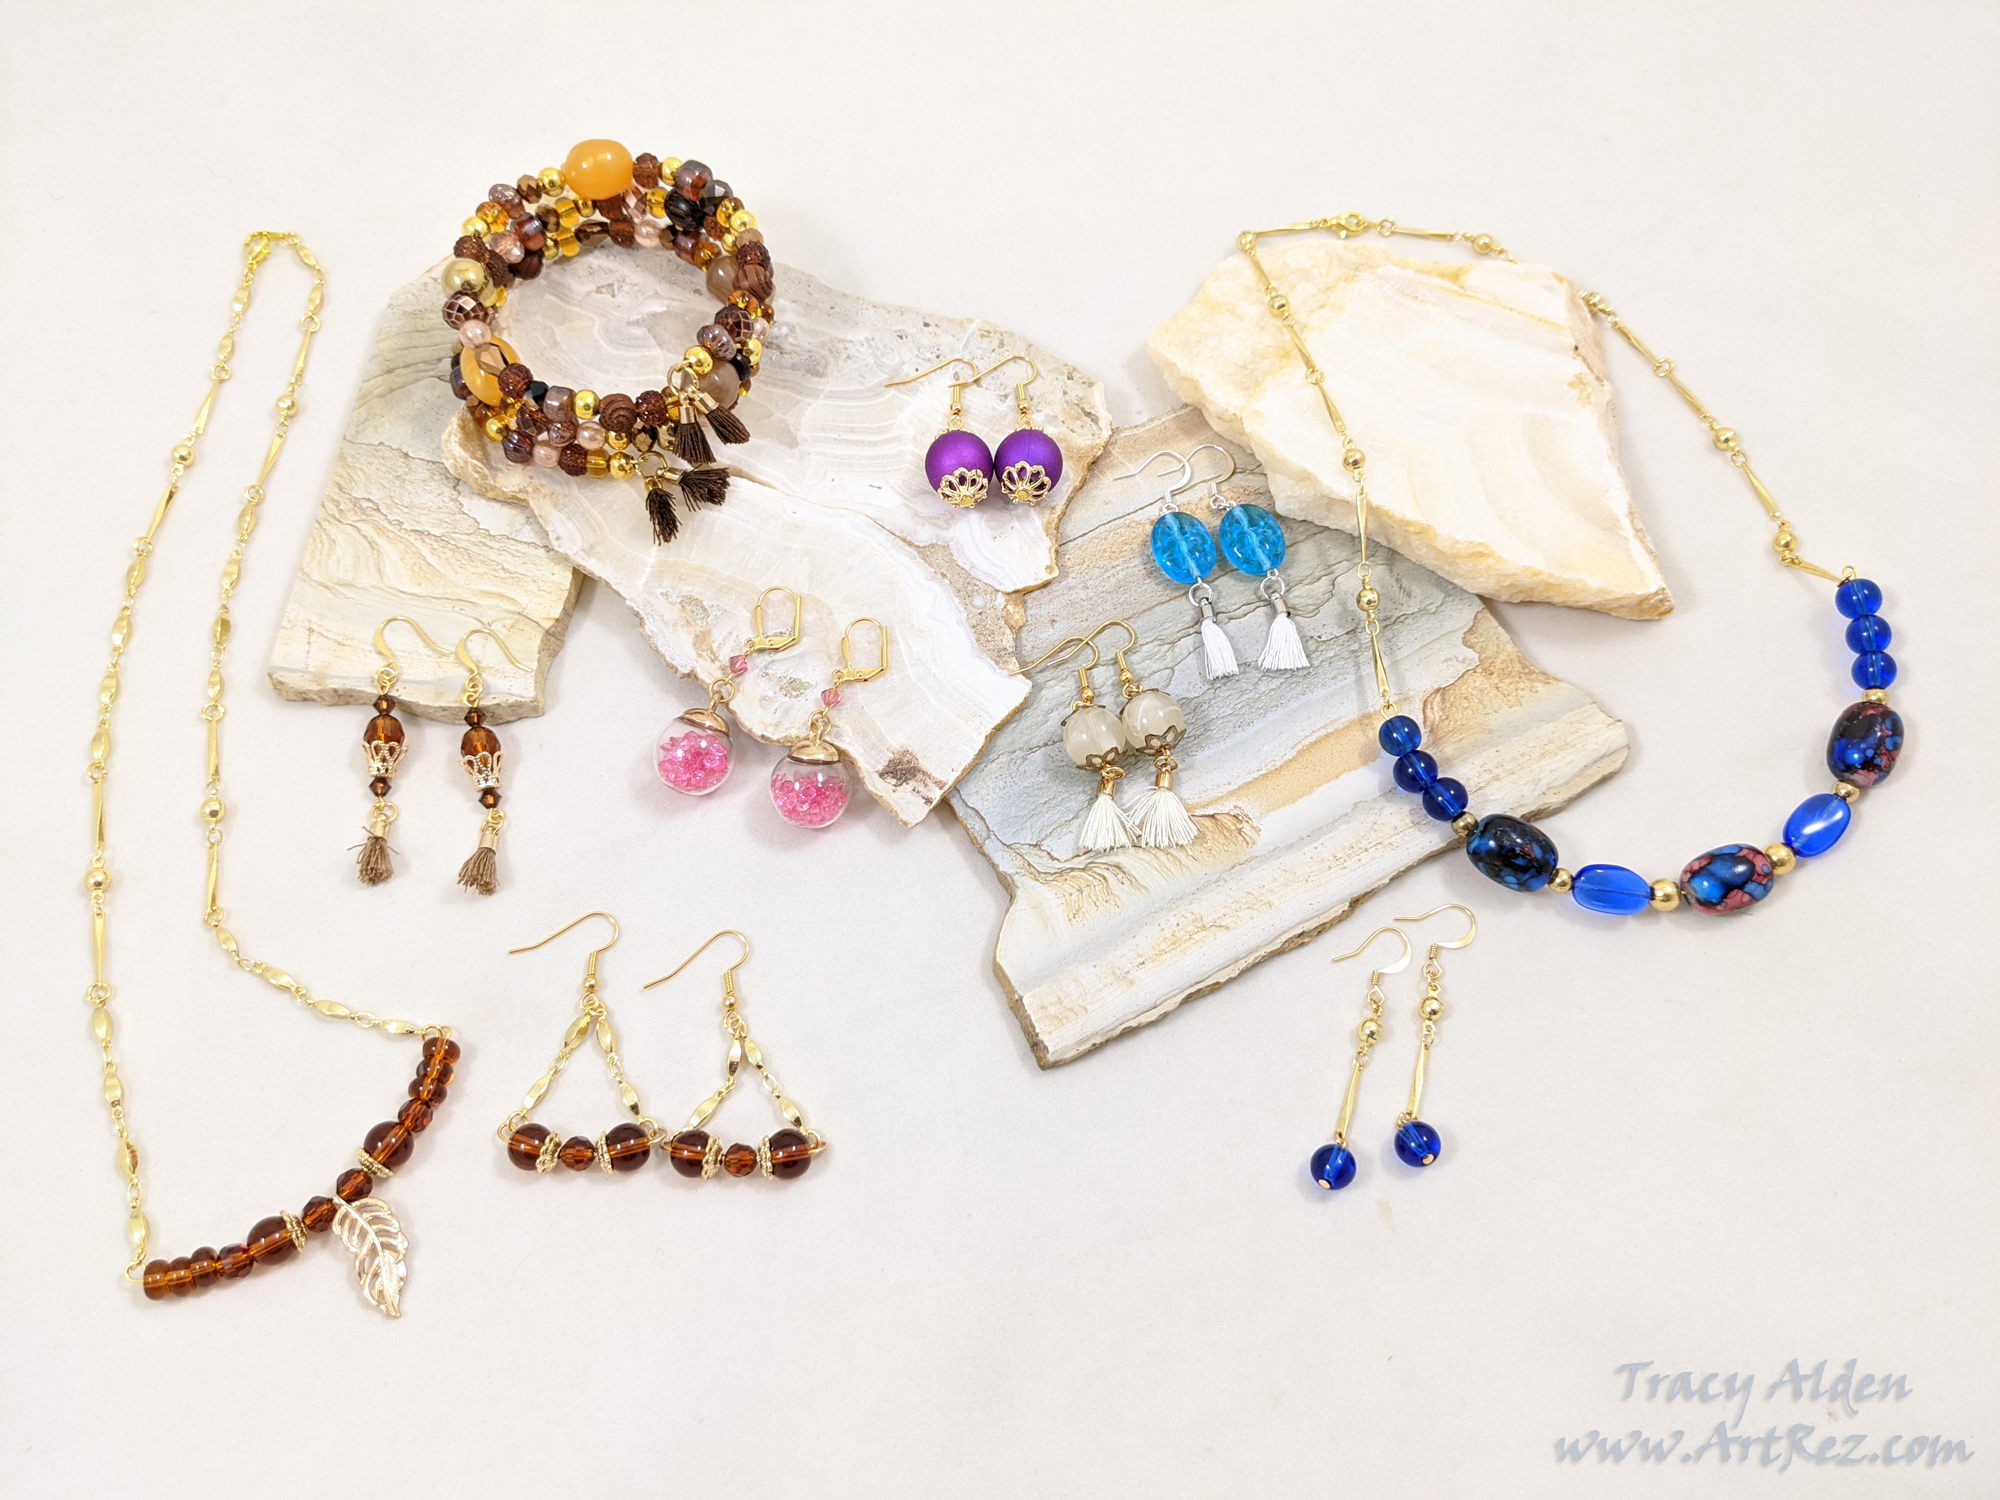 A mixed assortment of jewelry using gold tone mixed with brown, blue, purple and pink Jesse James Beads